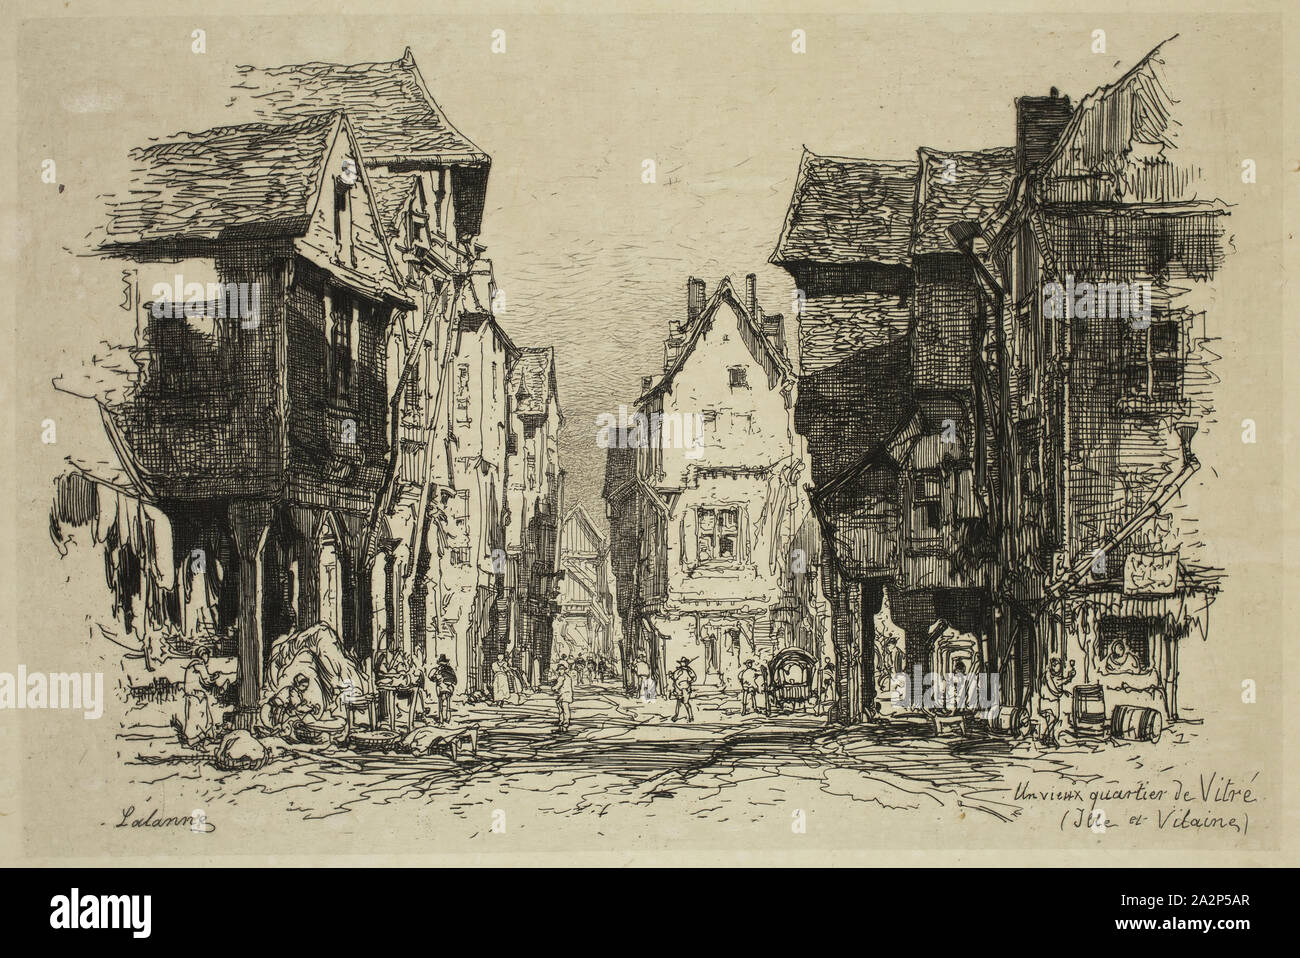 Maxime François Antoine Lalanne, French, 1827-1886, Un vieux quartier de Vitre, 1879, etching printed in black ink on japan paper mounted on paperboard, Plate: 7 7/8 × 11 1/8 inches (20 × 28.3 cm Stock Photo